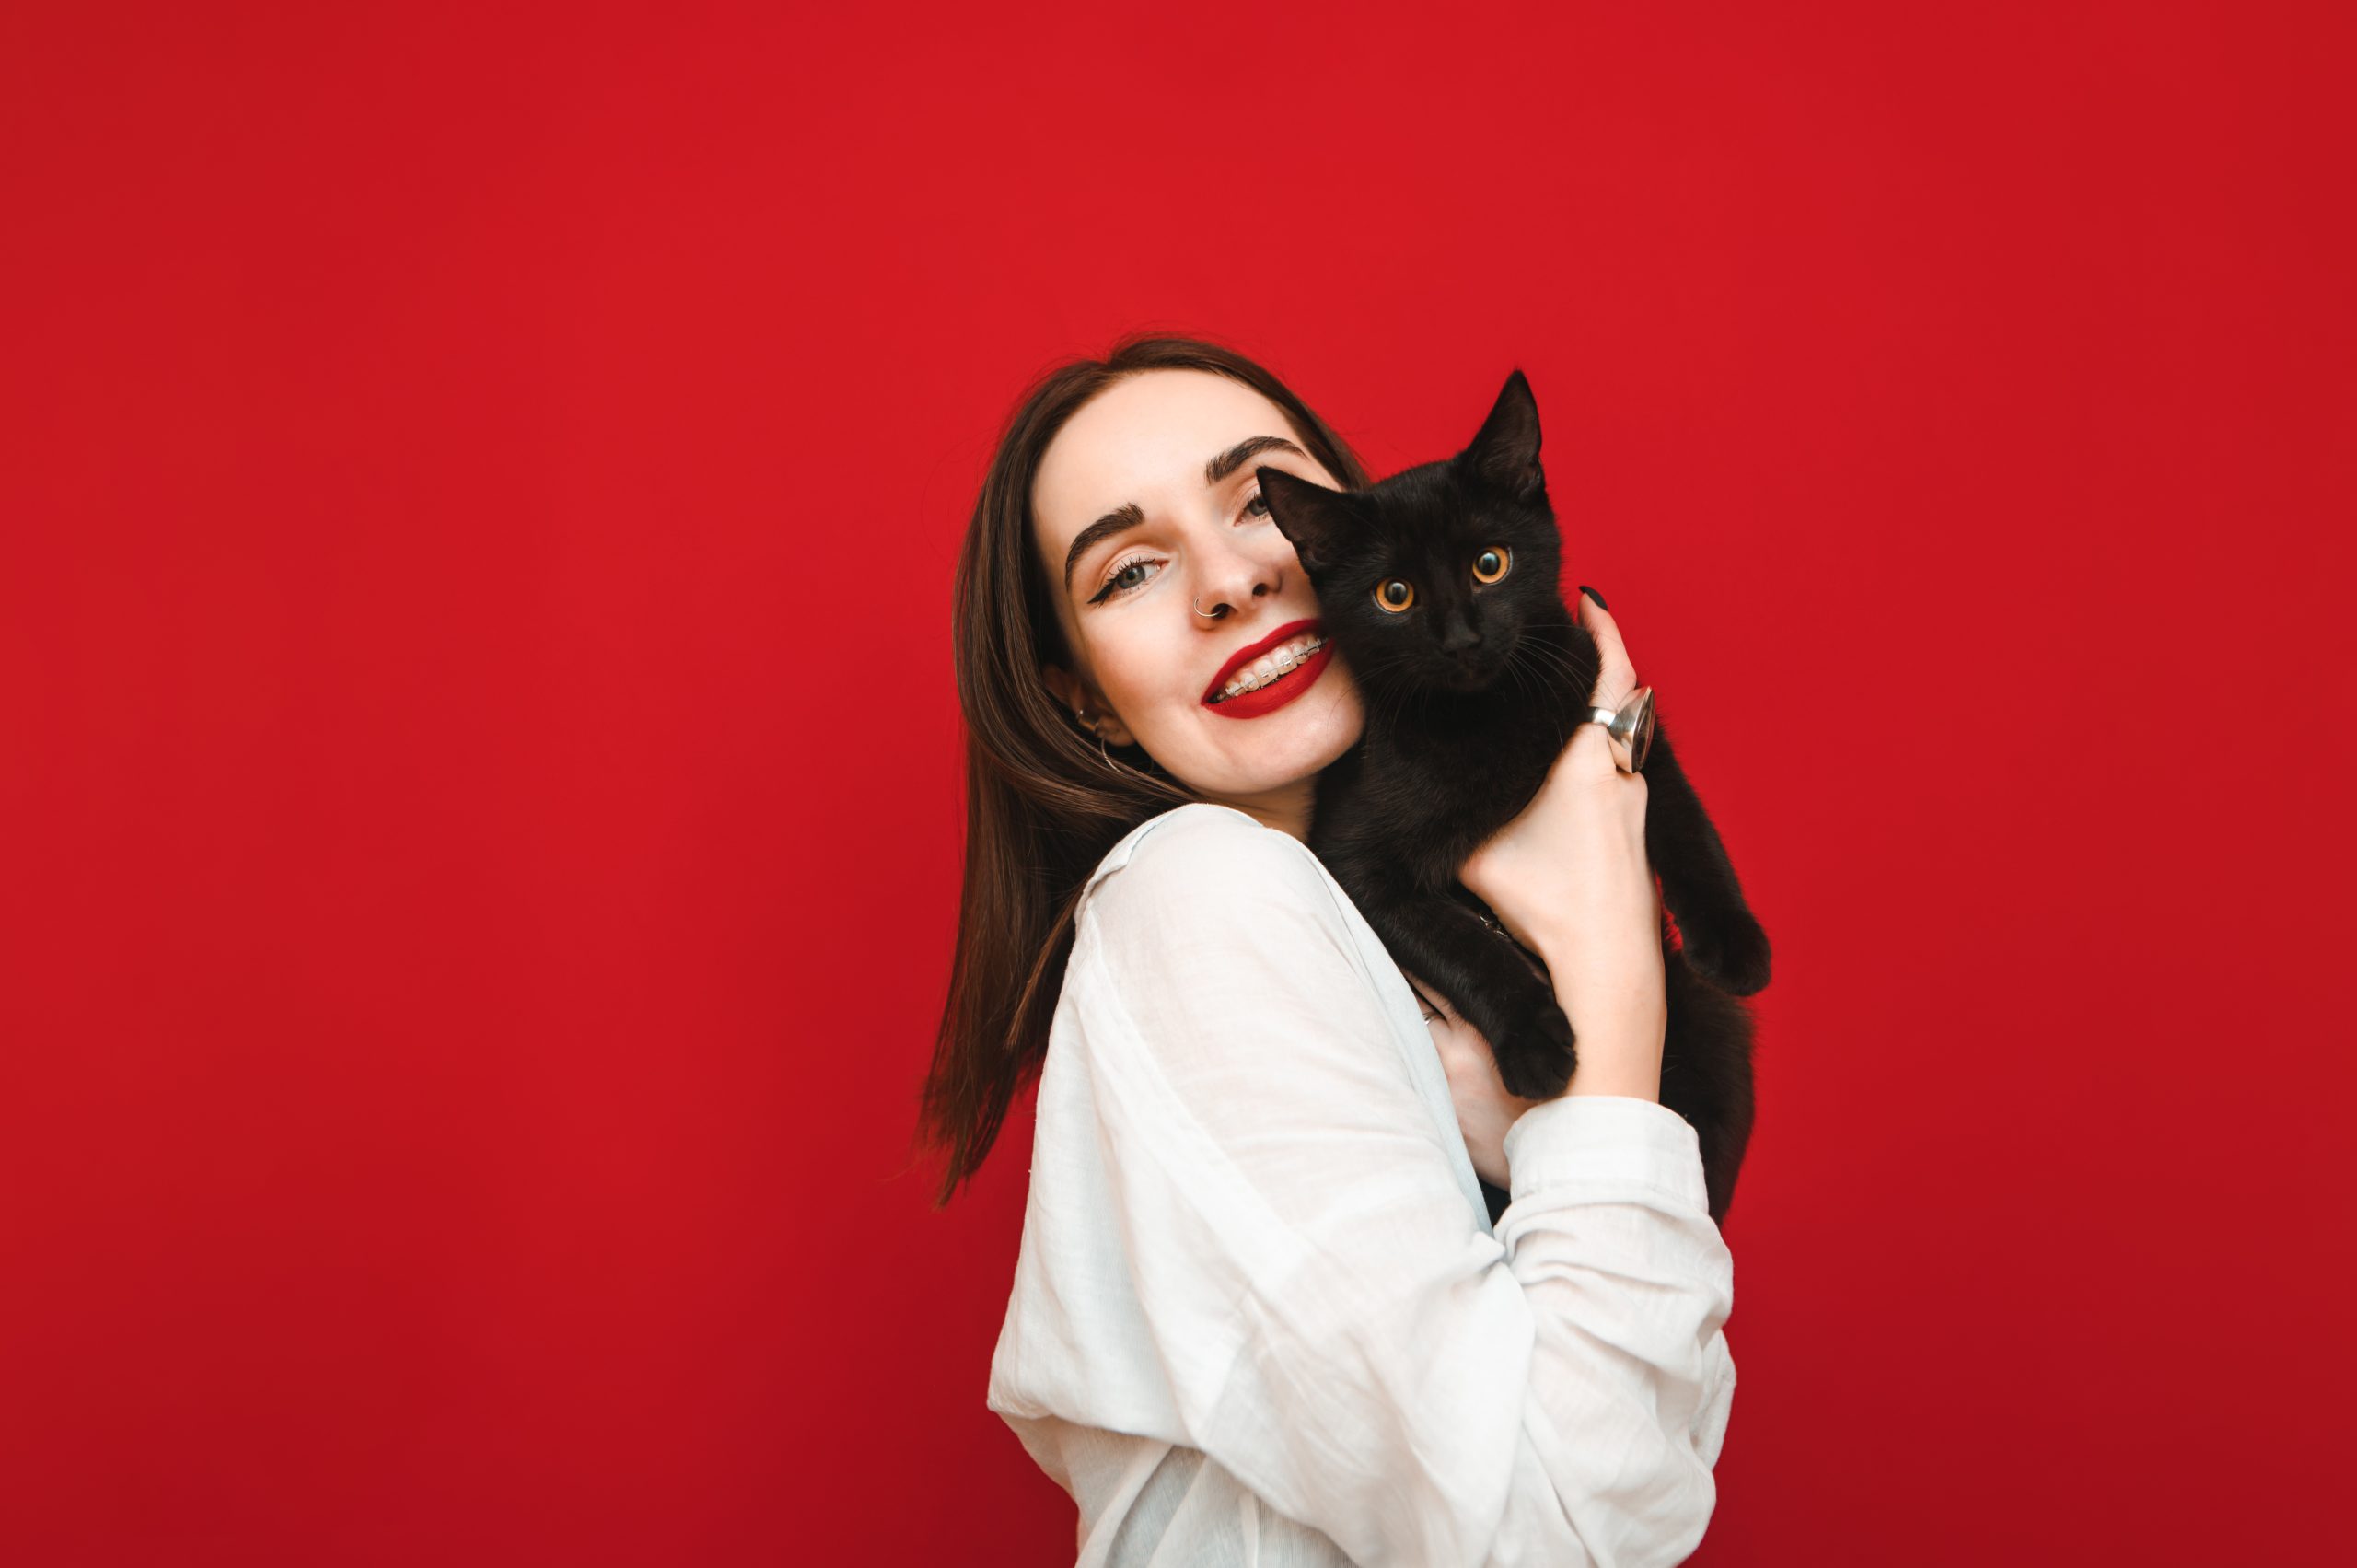 Portrait of a joyful girl hugging with a cute black cat on a red